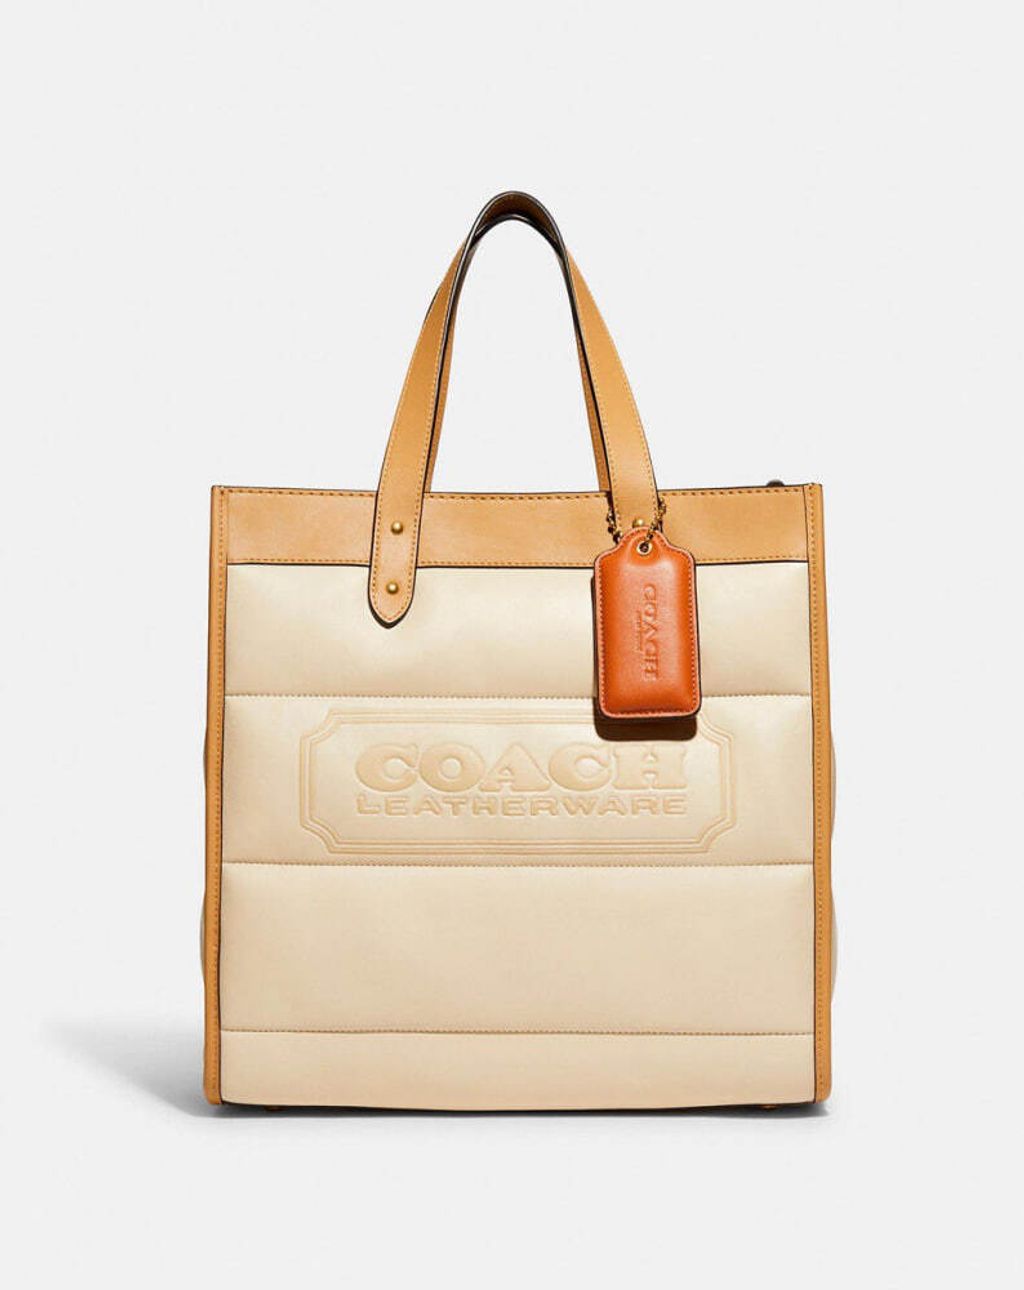 handbag branded coach outlet personalshopper usa malaysia ready stock COACH FIELD TOTE